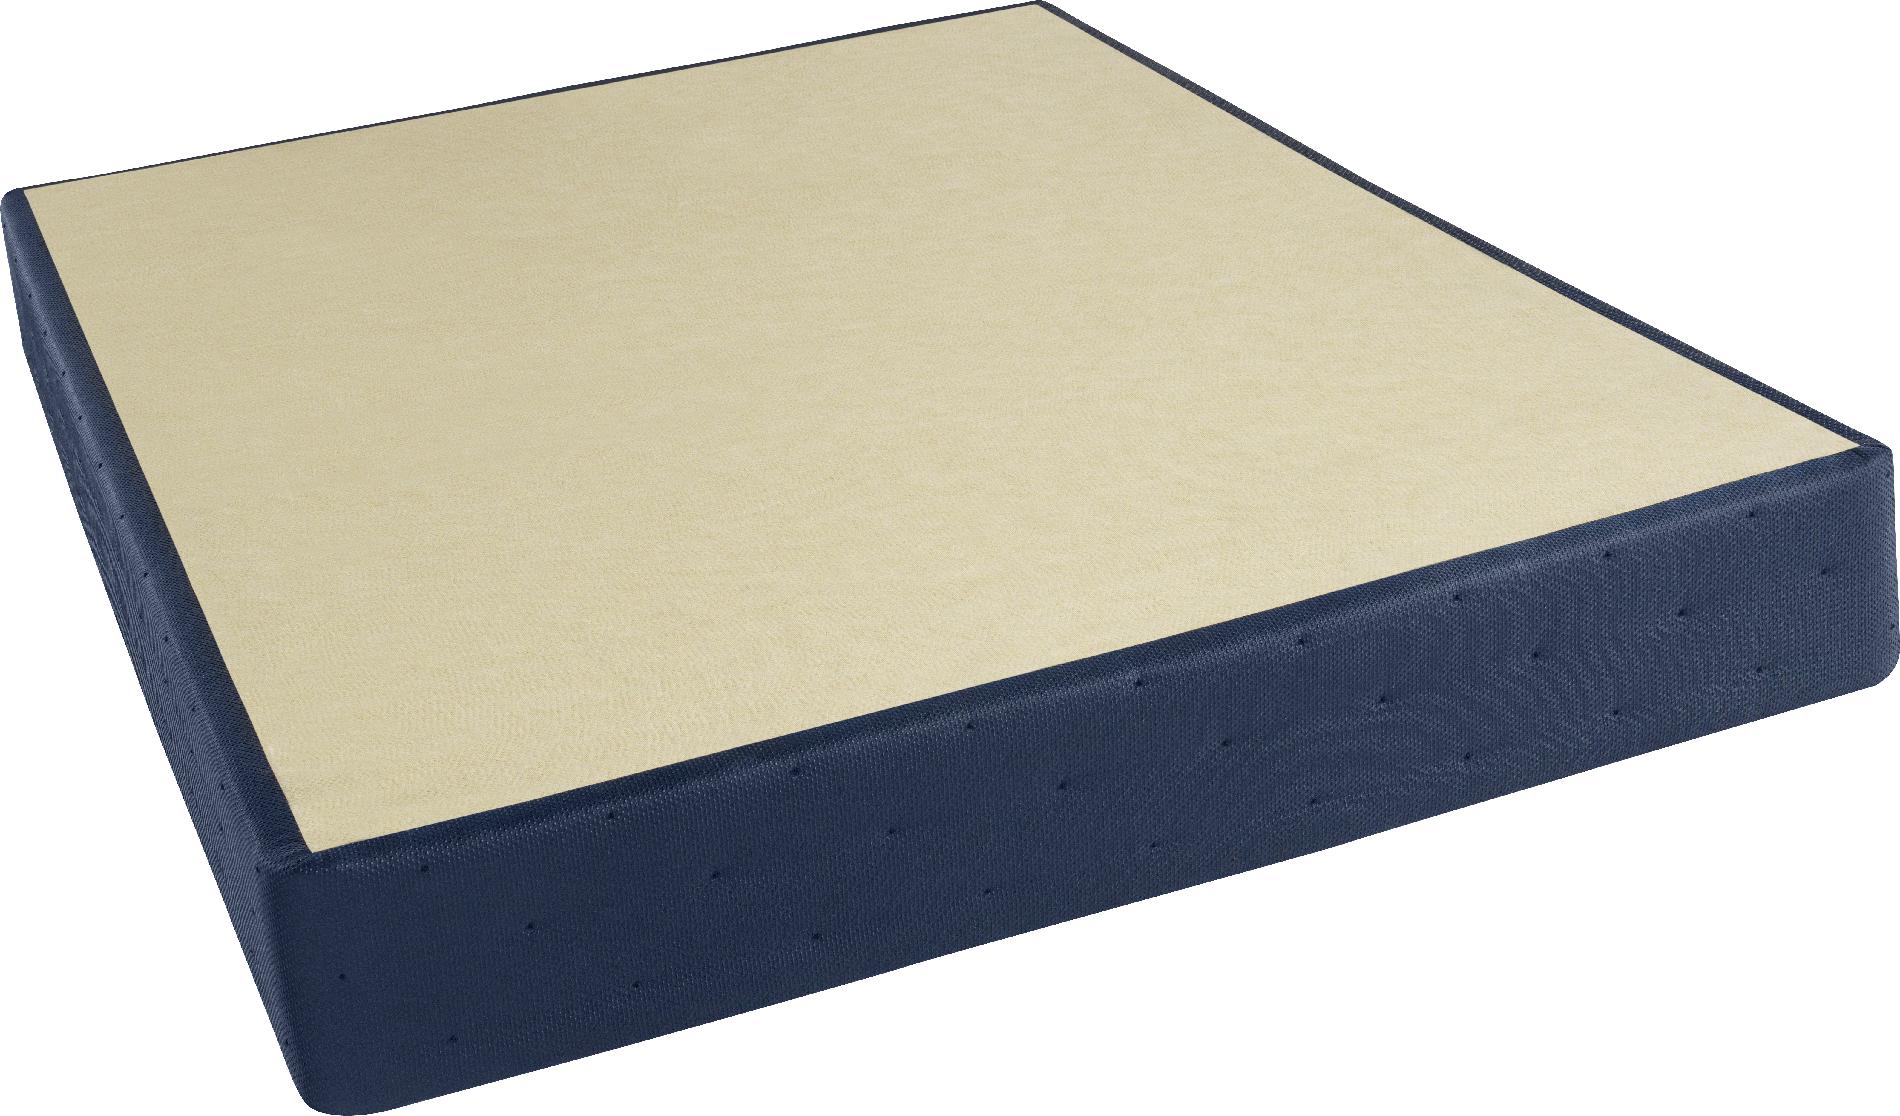 Beautyrest World Class II Boxspring Cal King Low Profile